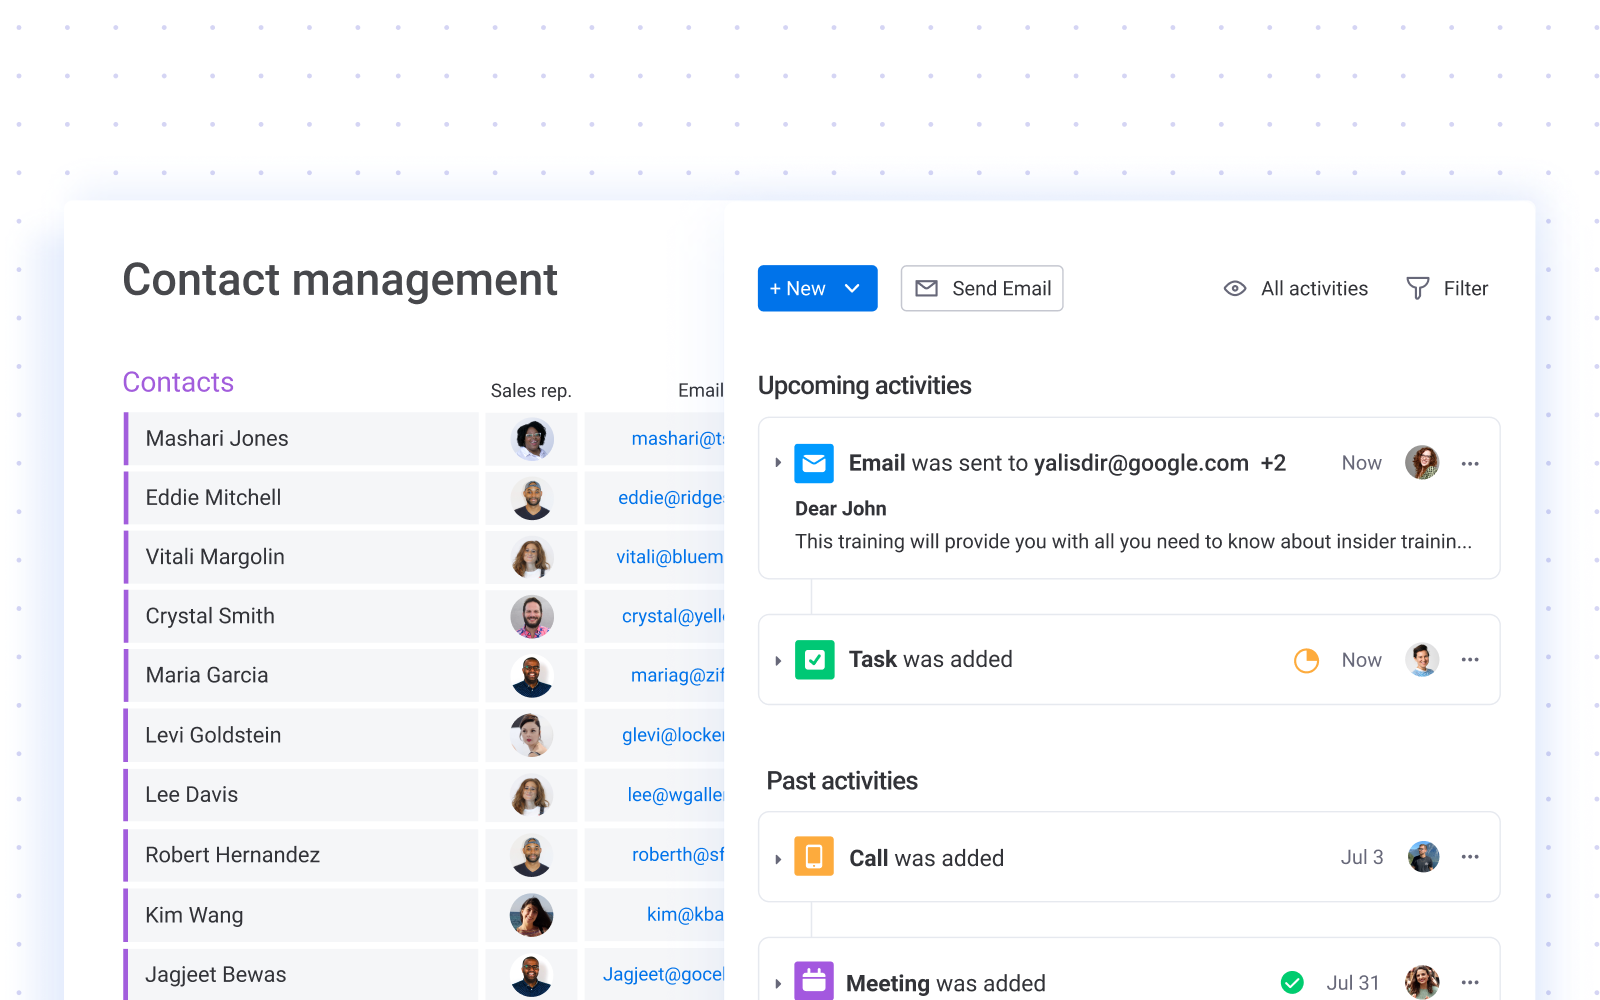 View and manage all contact details in one click, including activities, emails, and more.